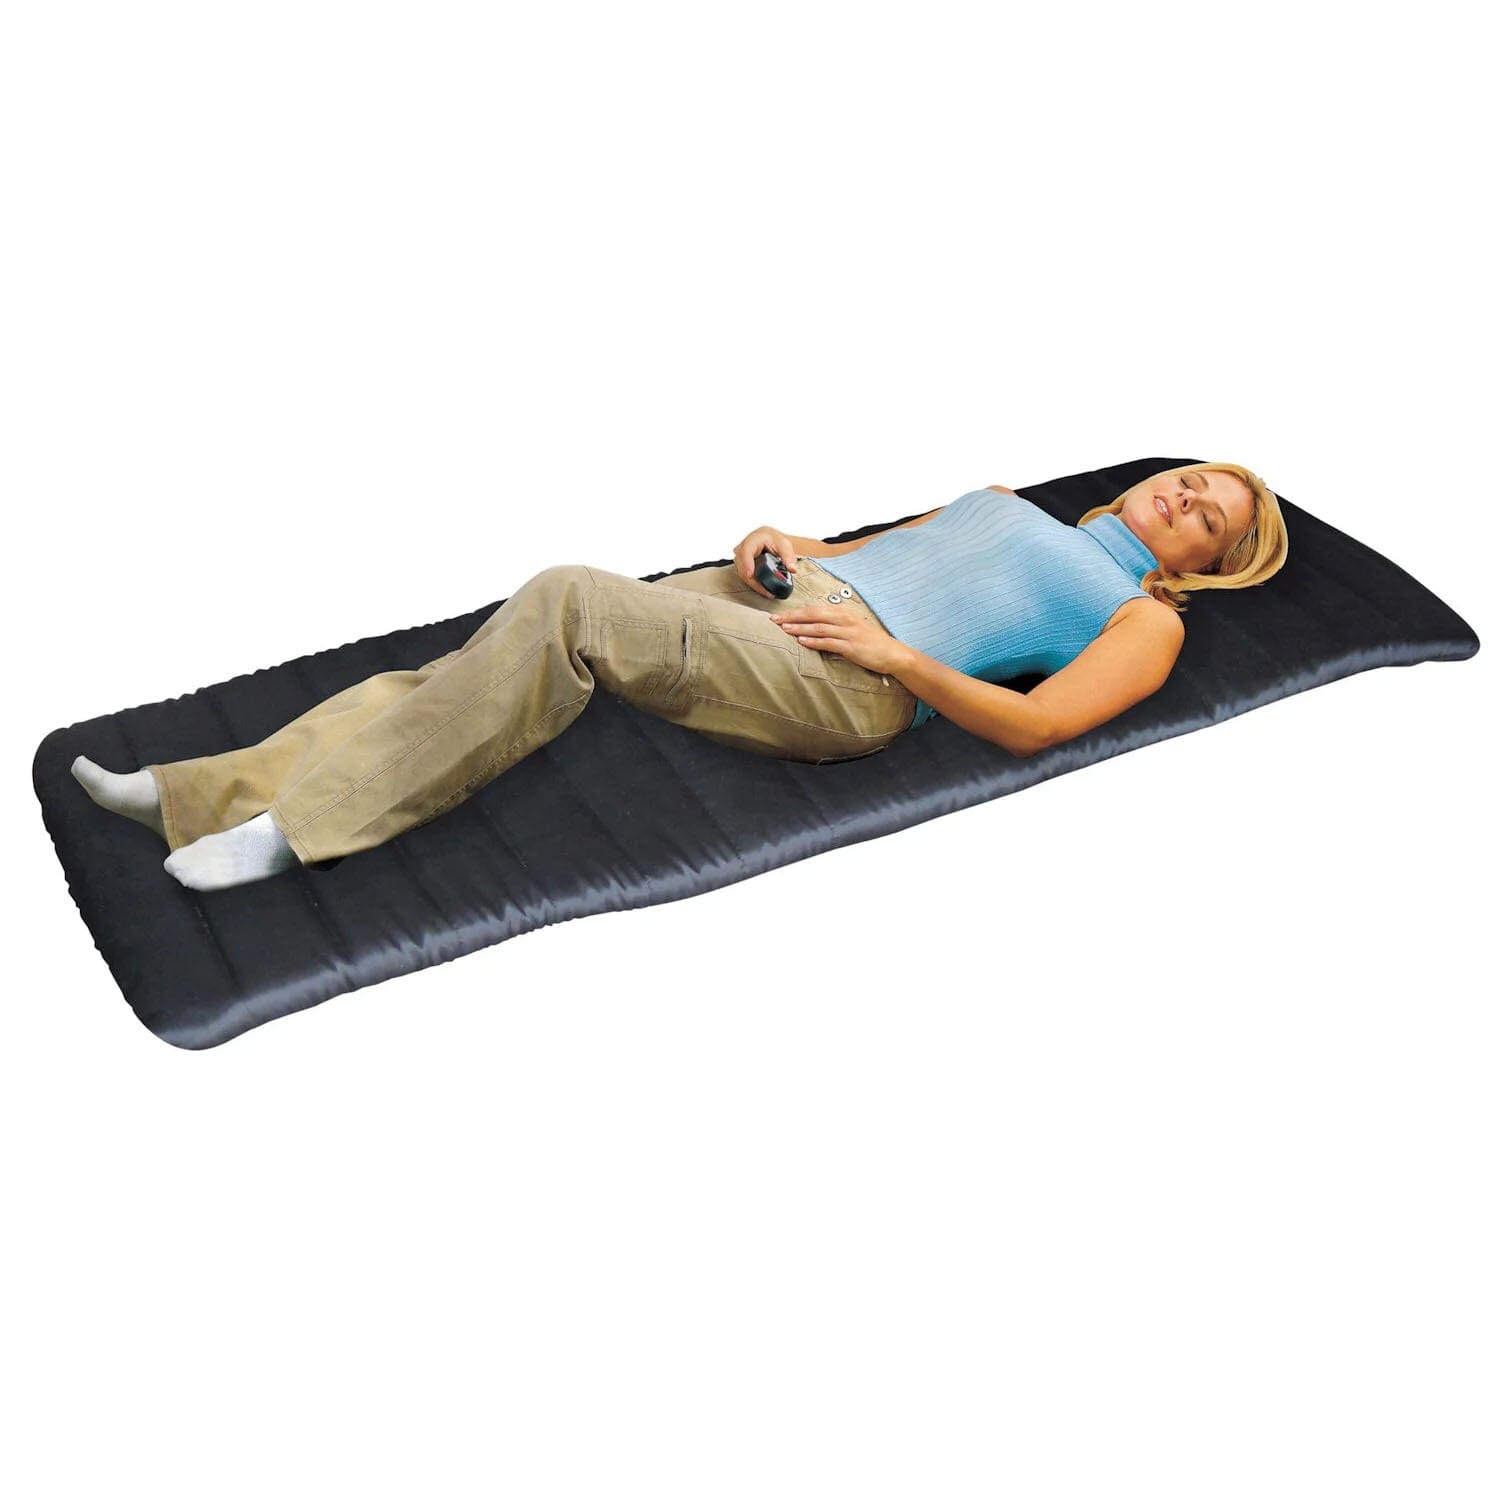 Heated Full Body Massage Mat with Remote Controller